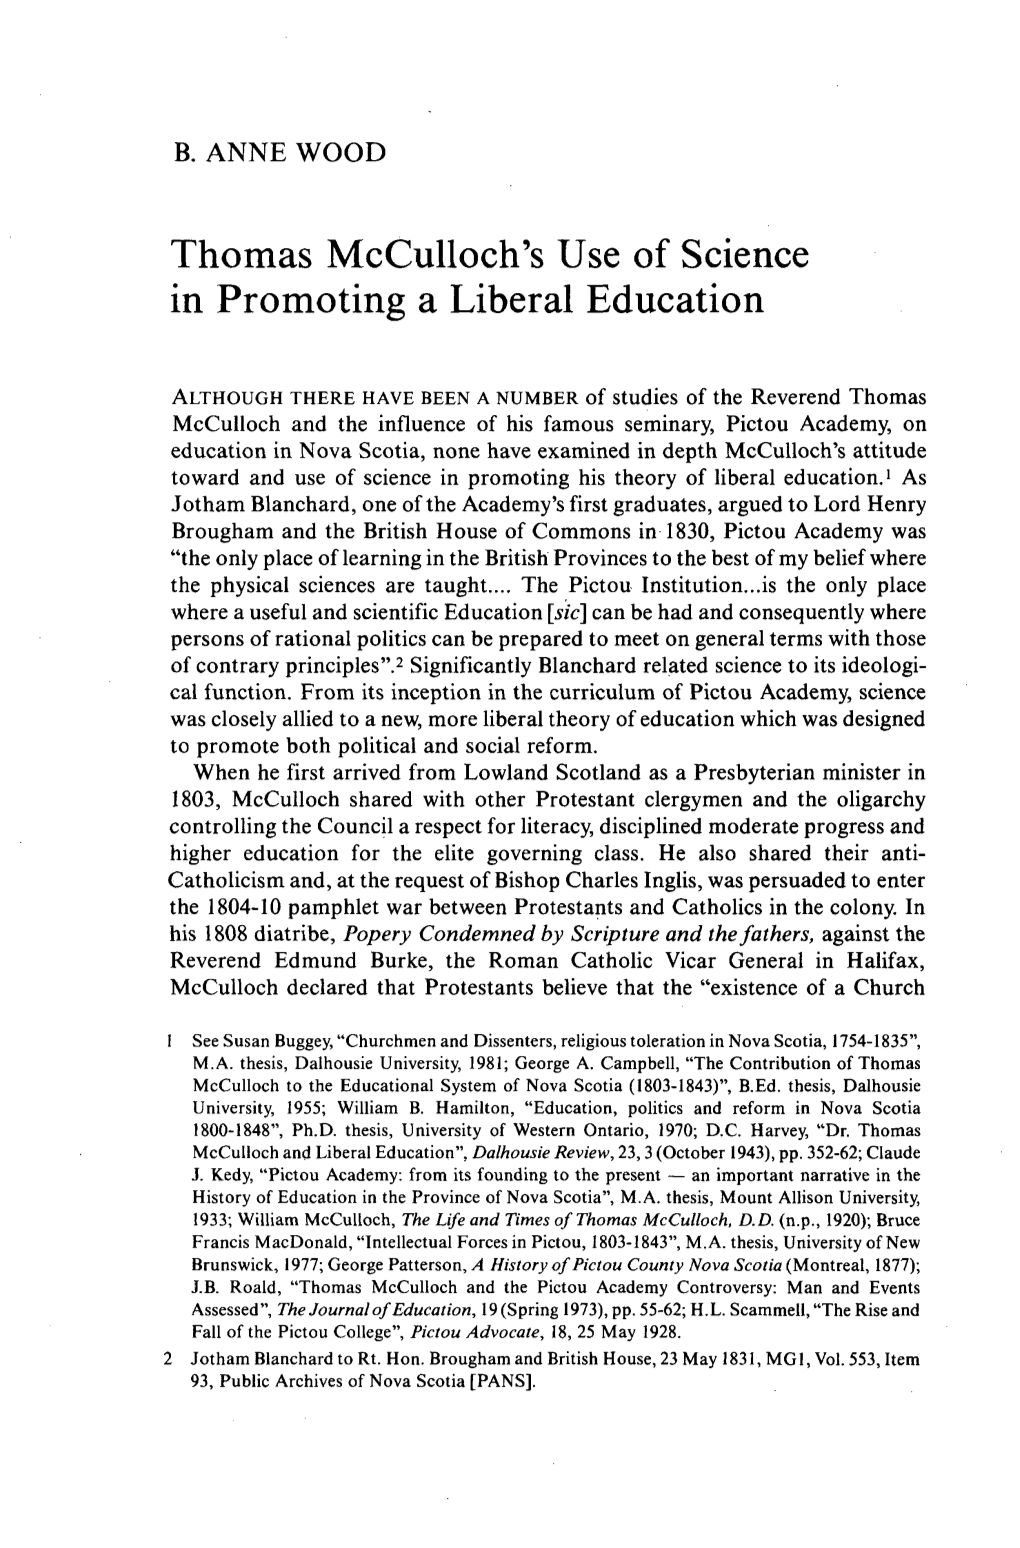 Thomas Mcculloch's Use of Science in Promoting a Liberal Education